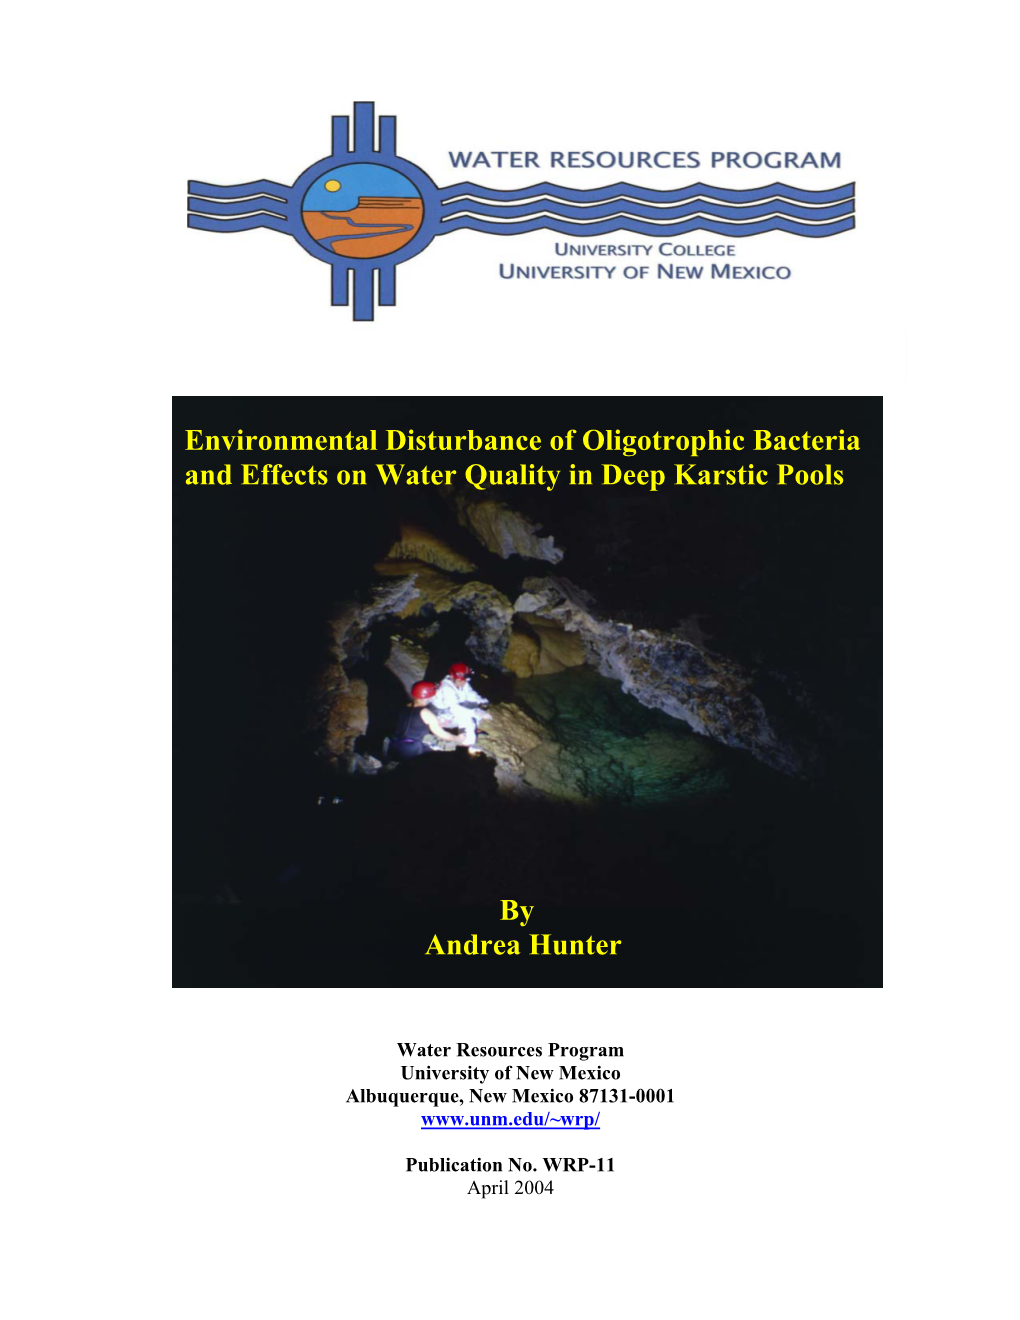 Environmental Disturbance of Oligotrophic Bacteria and Effects on Water Quality in Deep Karstic Pools